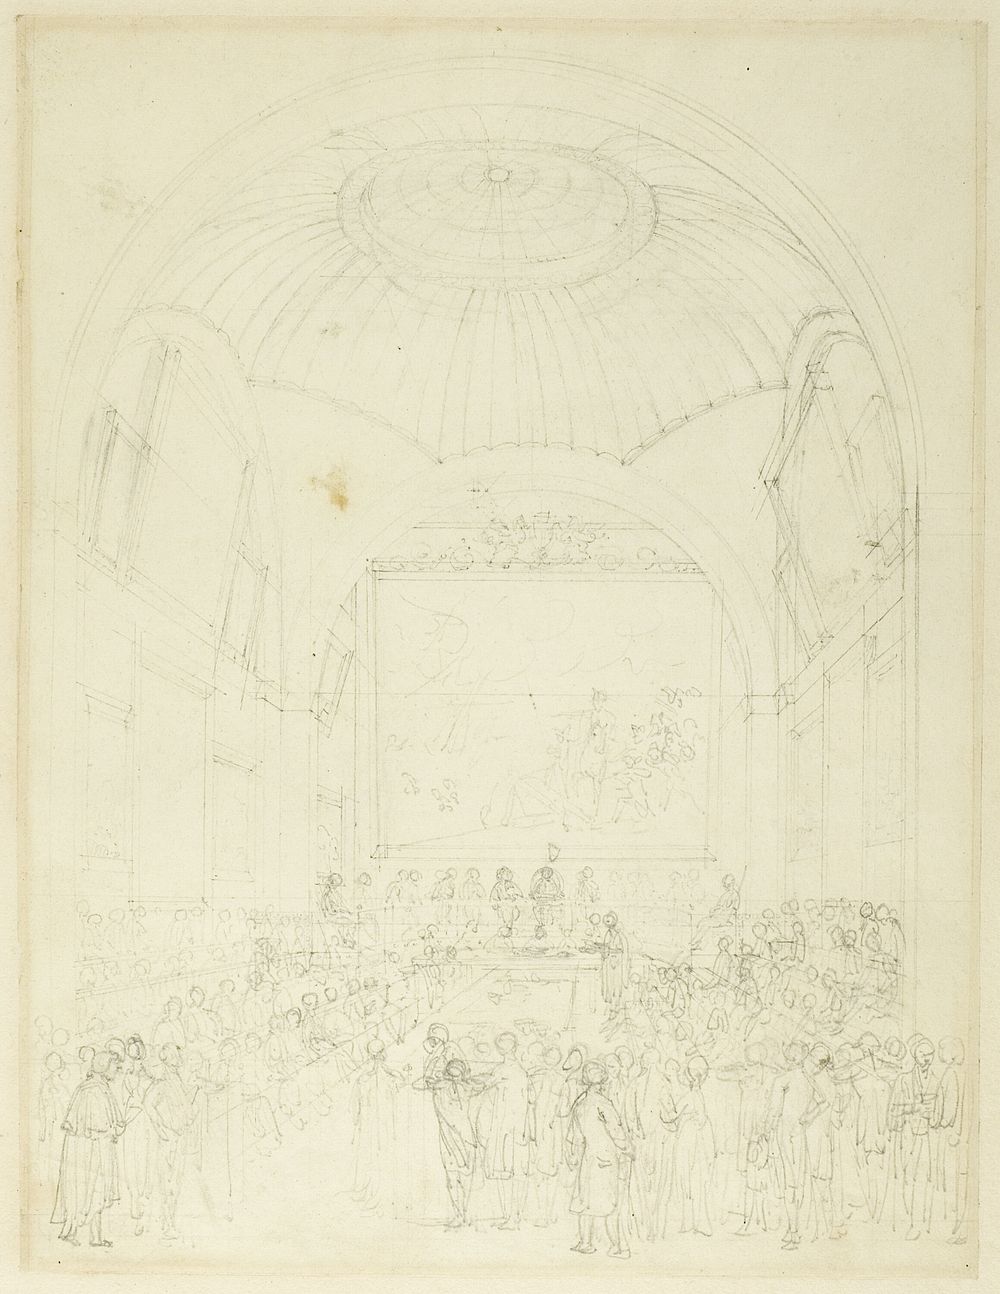 Study for Common Council Chamber, Guild Hall, from Microcosm of London by Augustus Charles Pugin